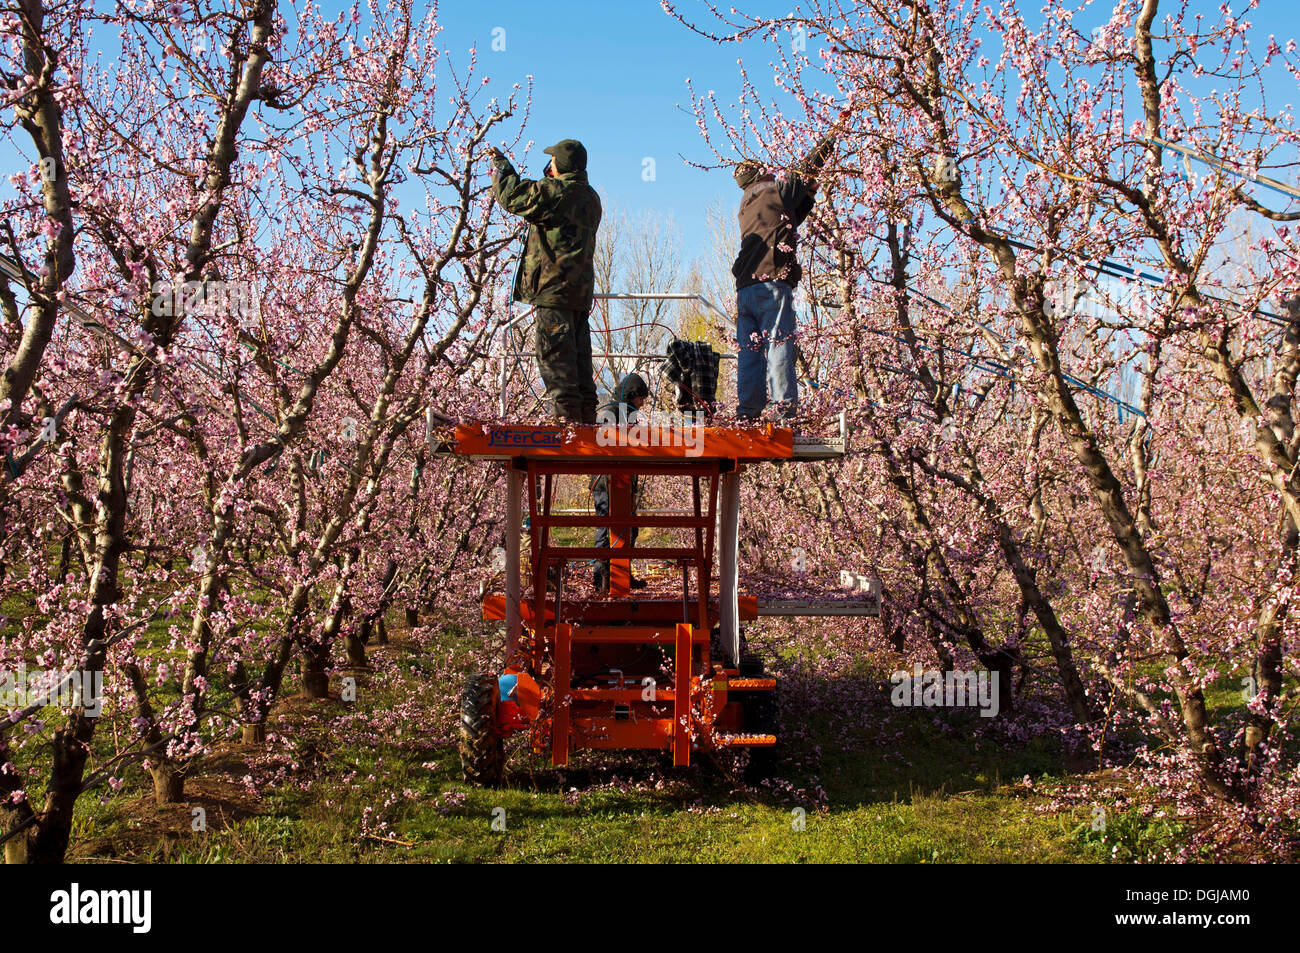 Gardeners cutting Peach trees (Prunus persica) at an orchard while they are blossoming, Castelnou, Pyrénées-Orientales, France Stock Photo